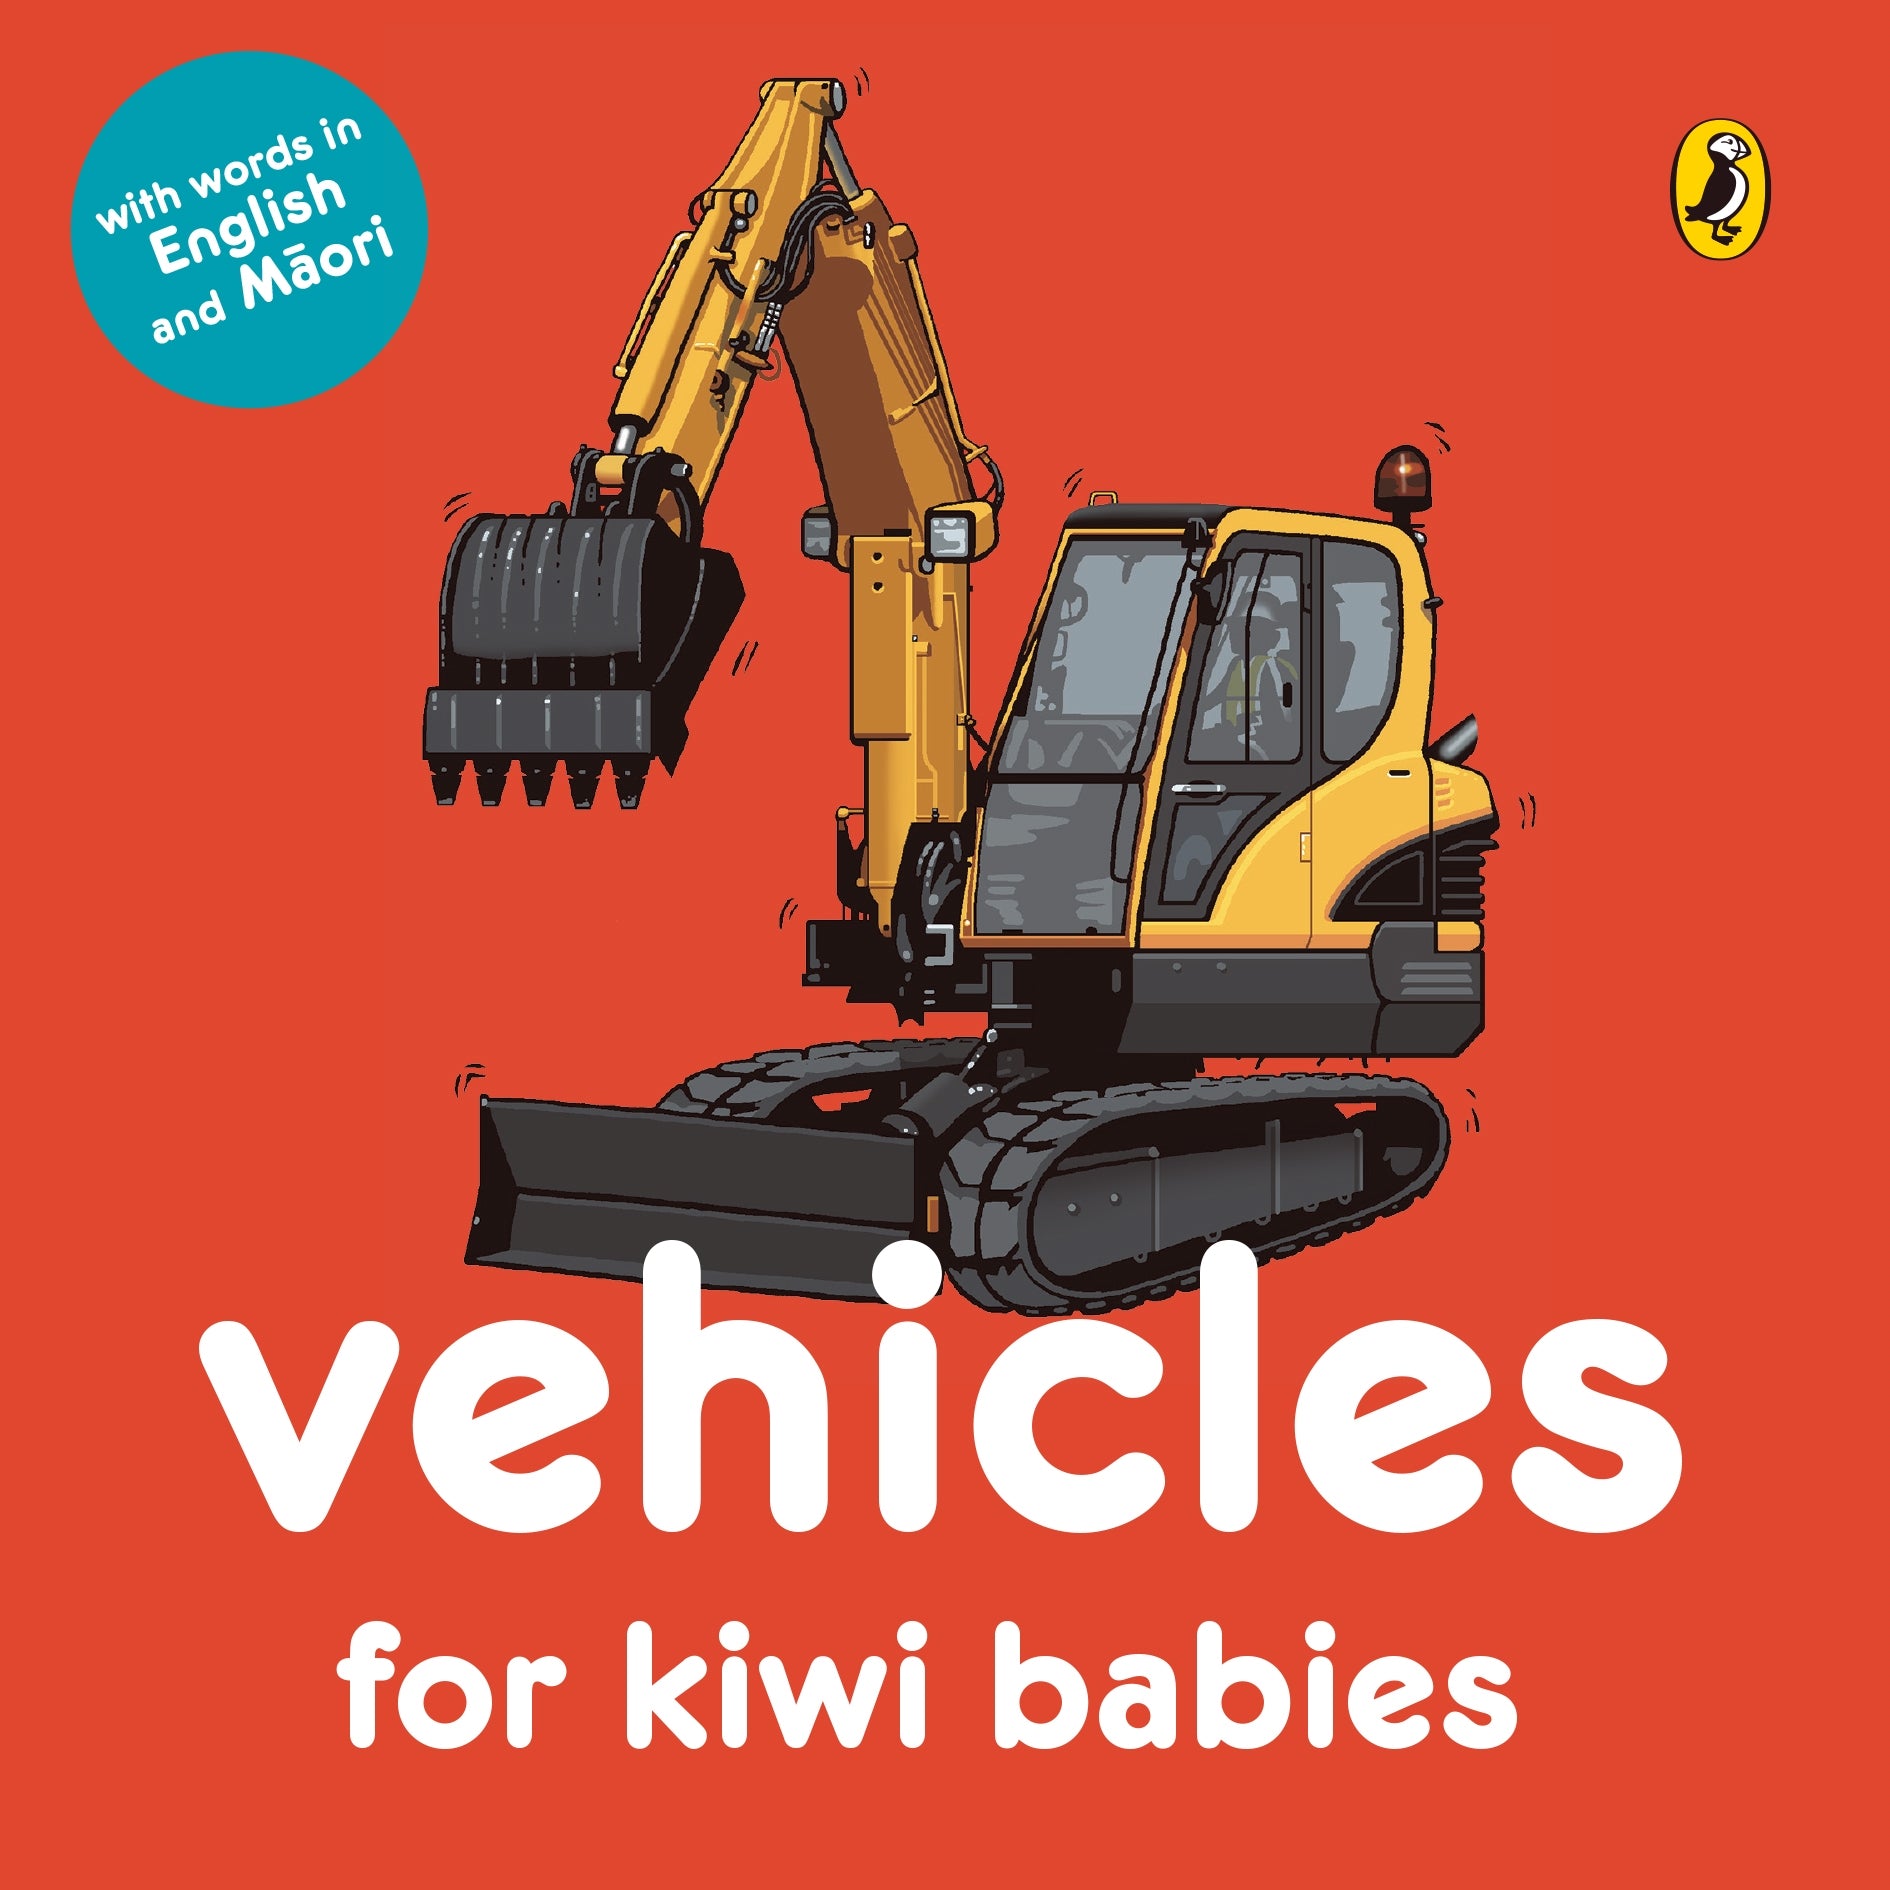 Vehicles for Kiwi Babies Board Book by Penguin Books from Bear & Moo